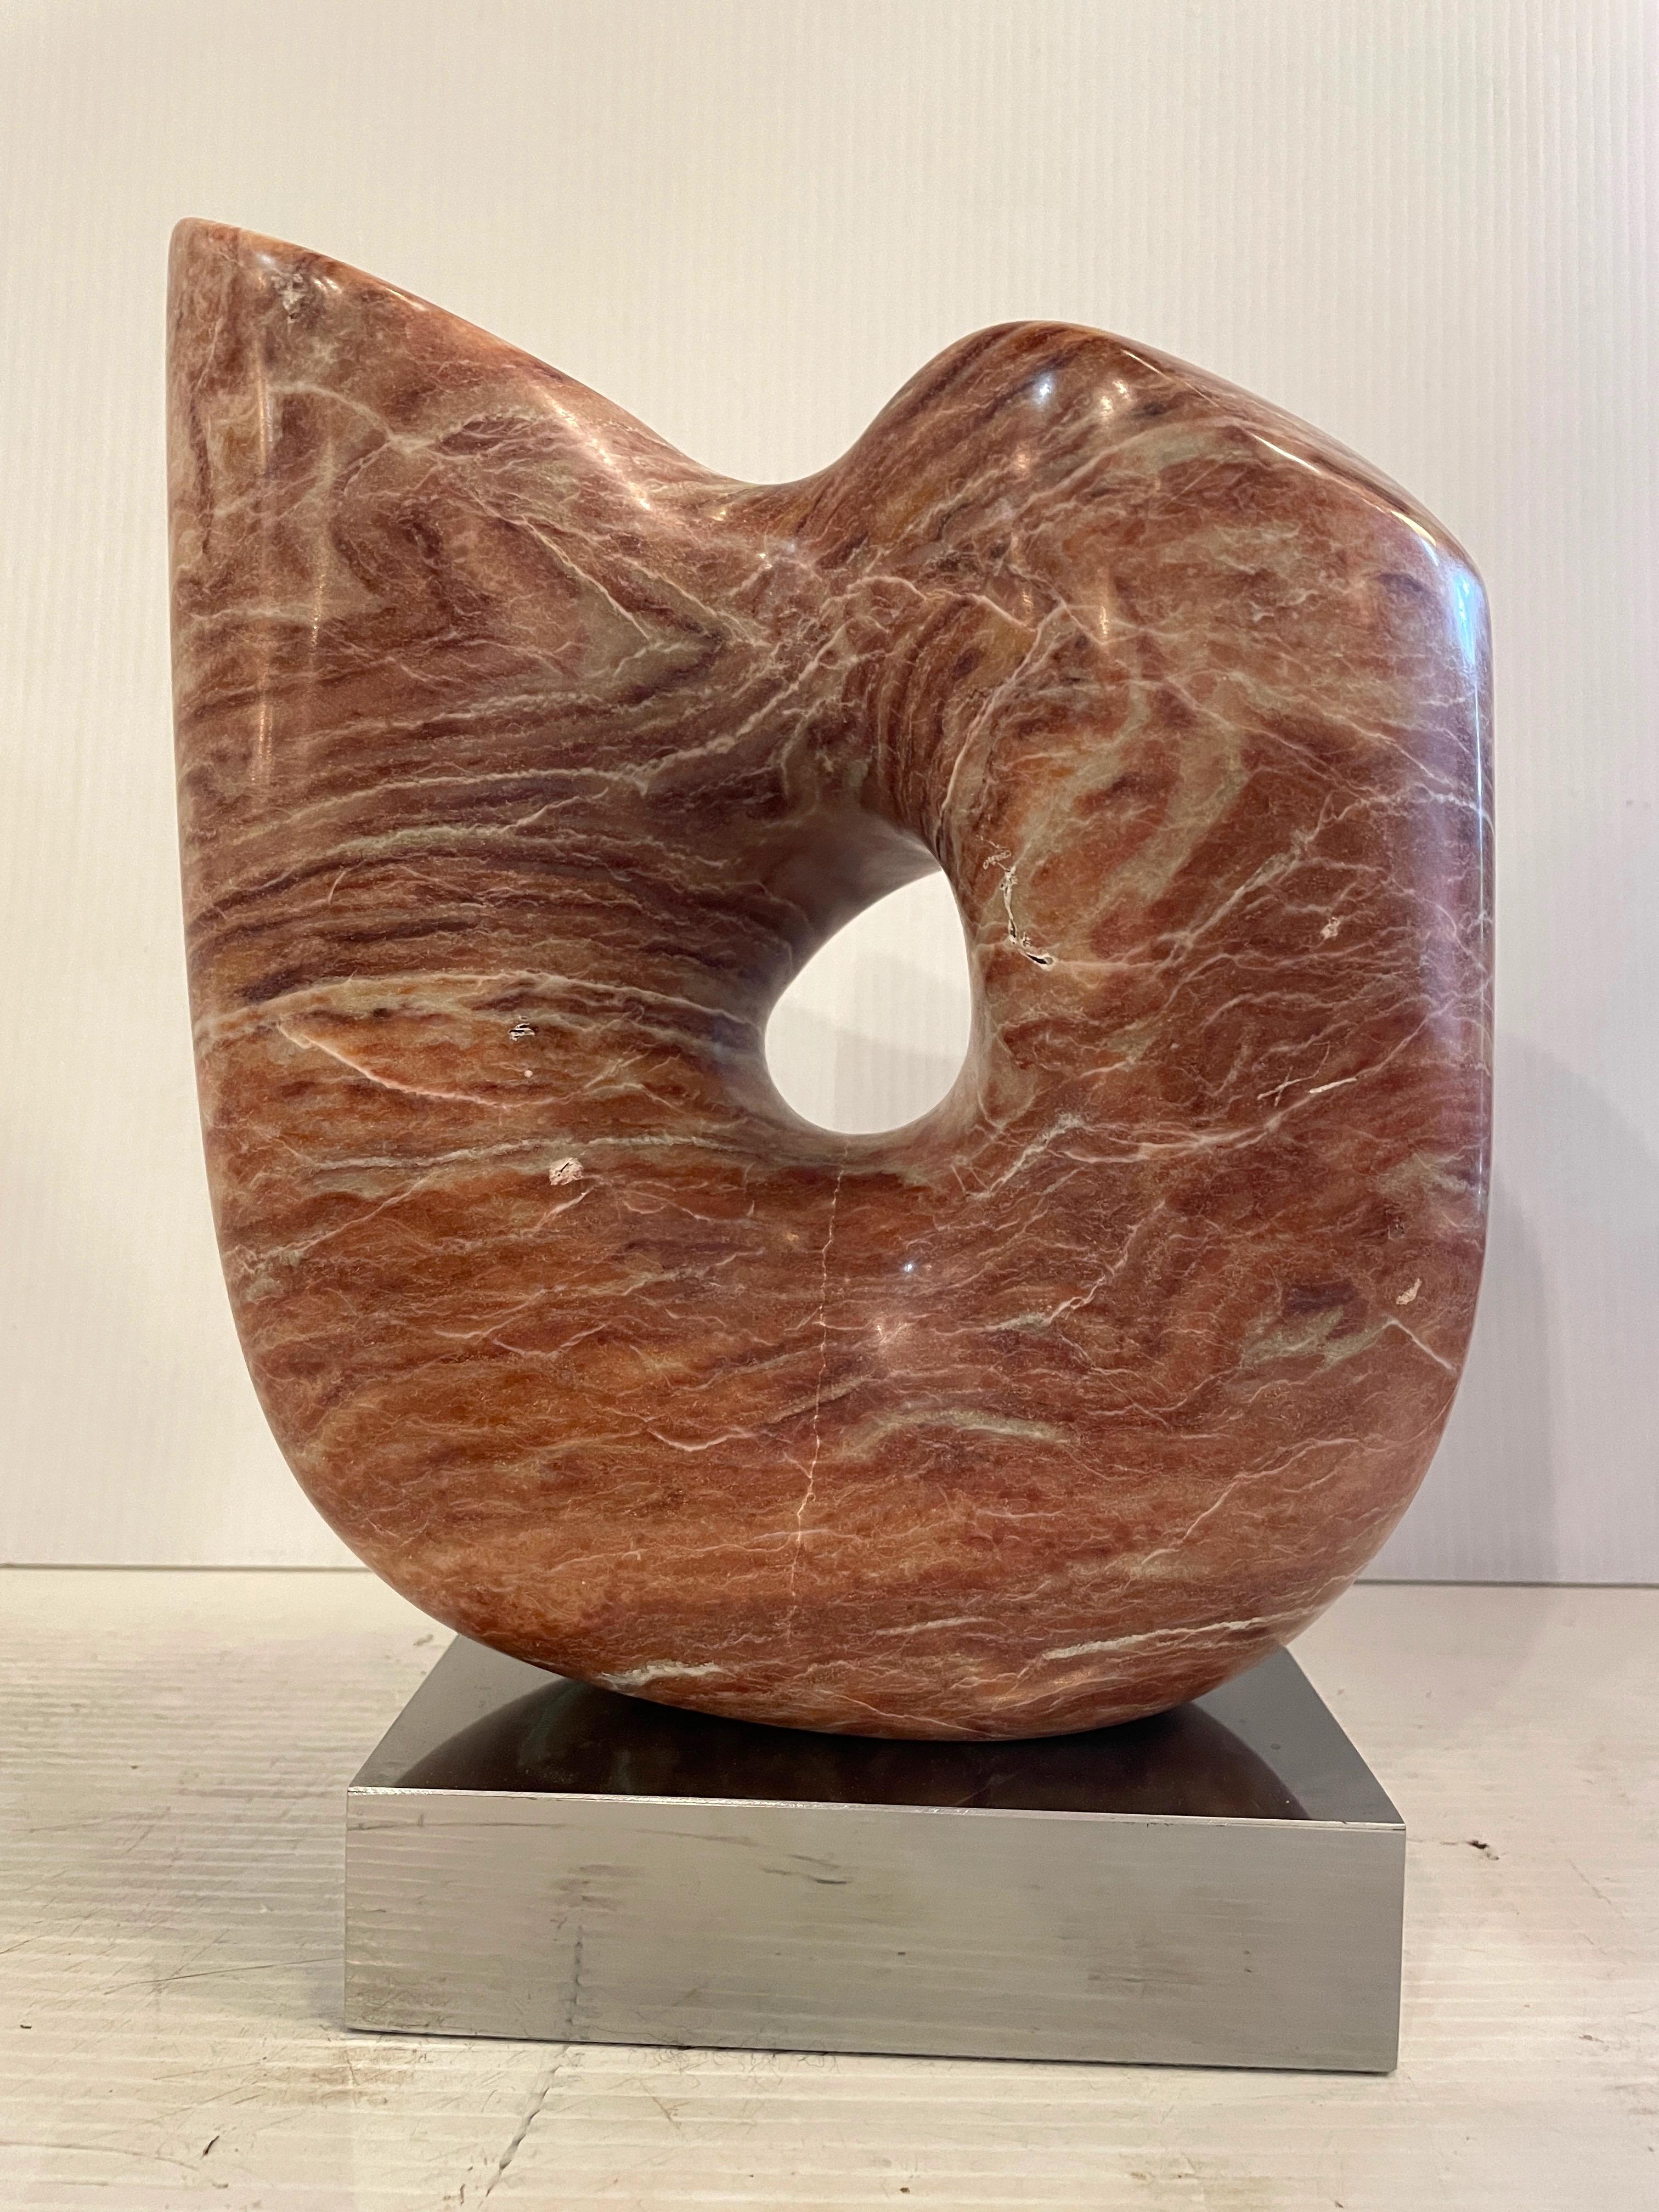 Unique polished pink marble abstract sculpture with a chrome base. This beautiful one of a kind sculpture would make a great art piece to add some warmth and sophistication to your home or office.

Please confirm item location NY or NJ with dealer.